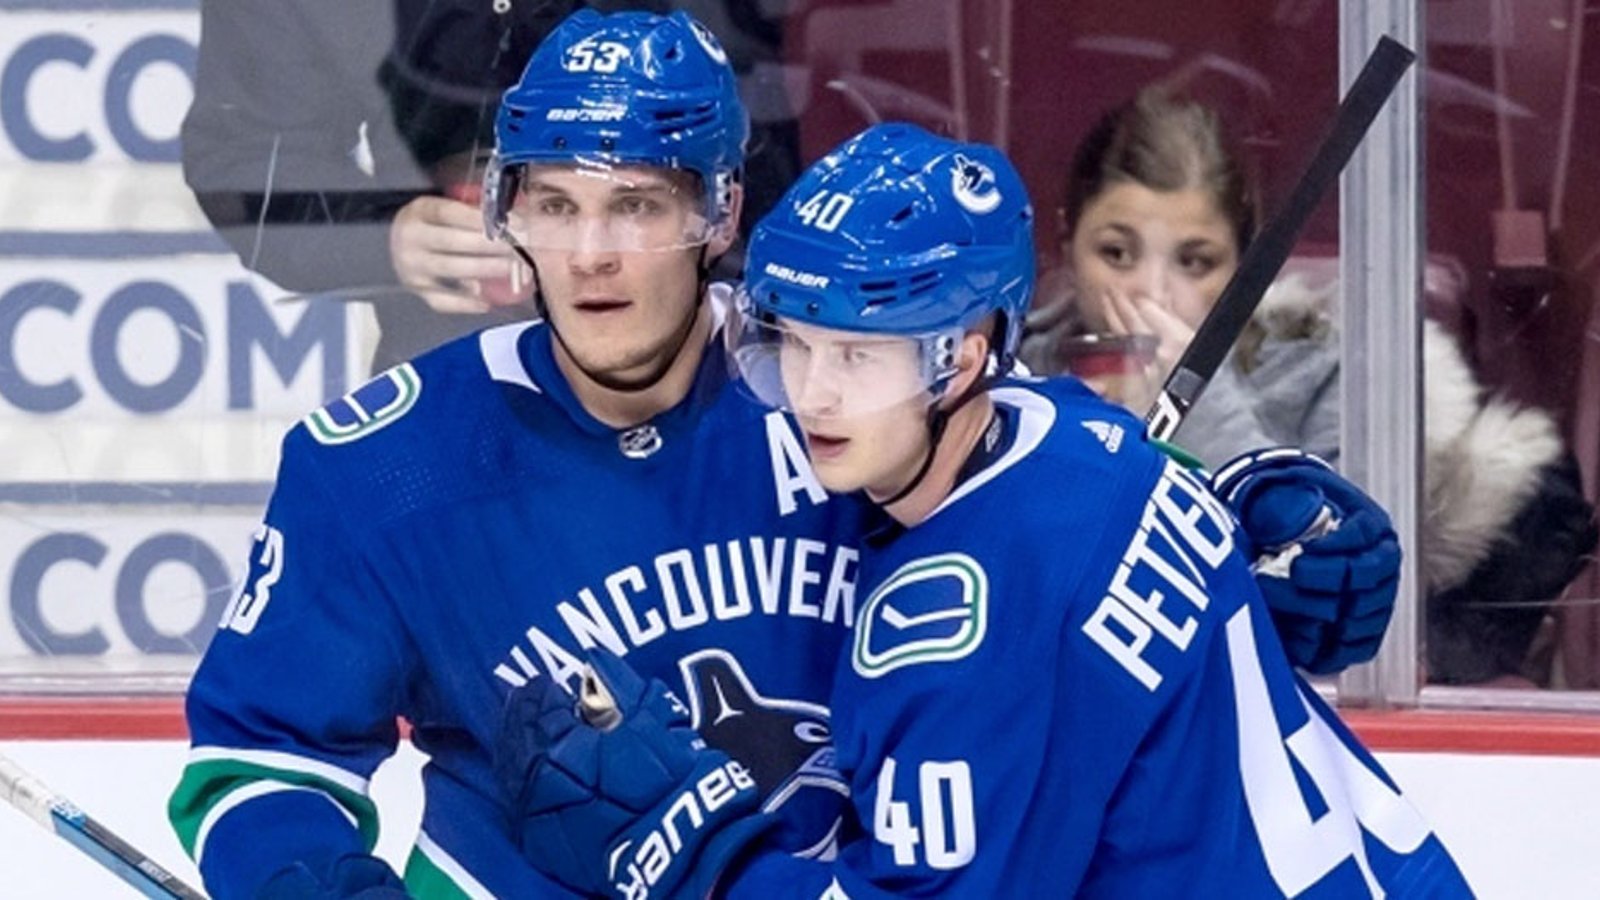 Canucks captaincy announcement reported leaked a day before official unveiling  